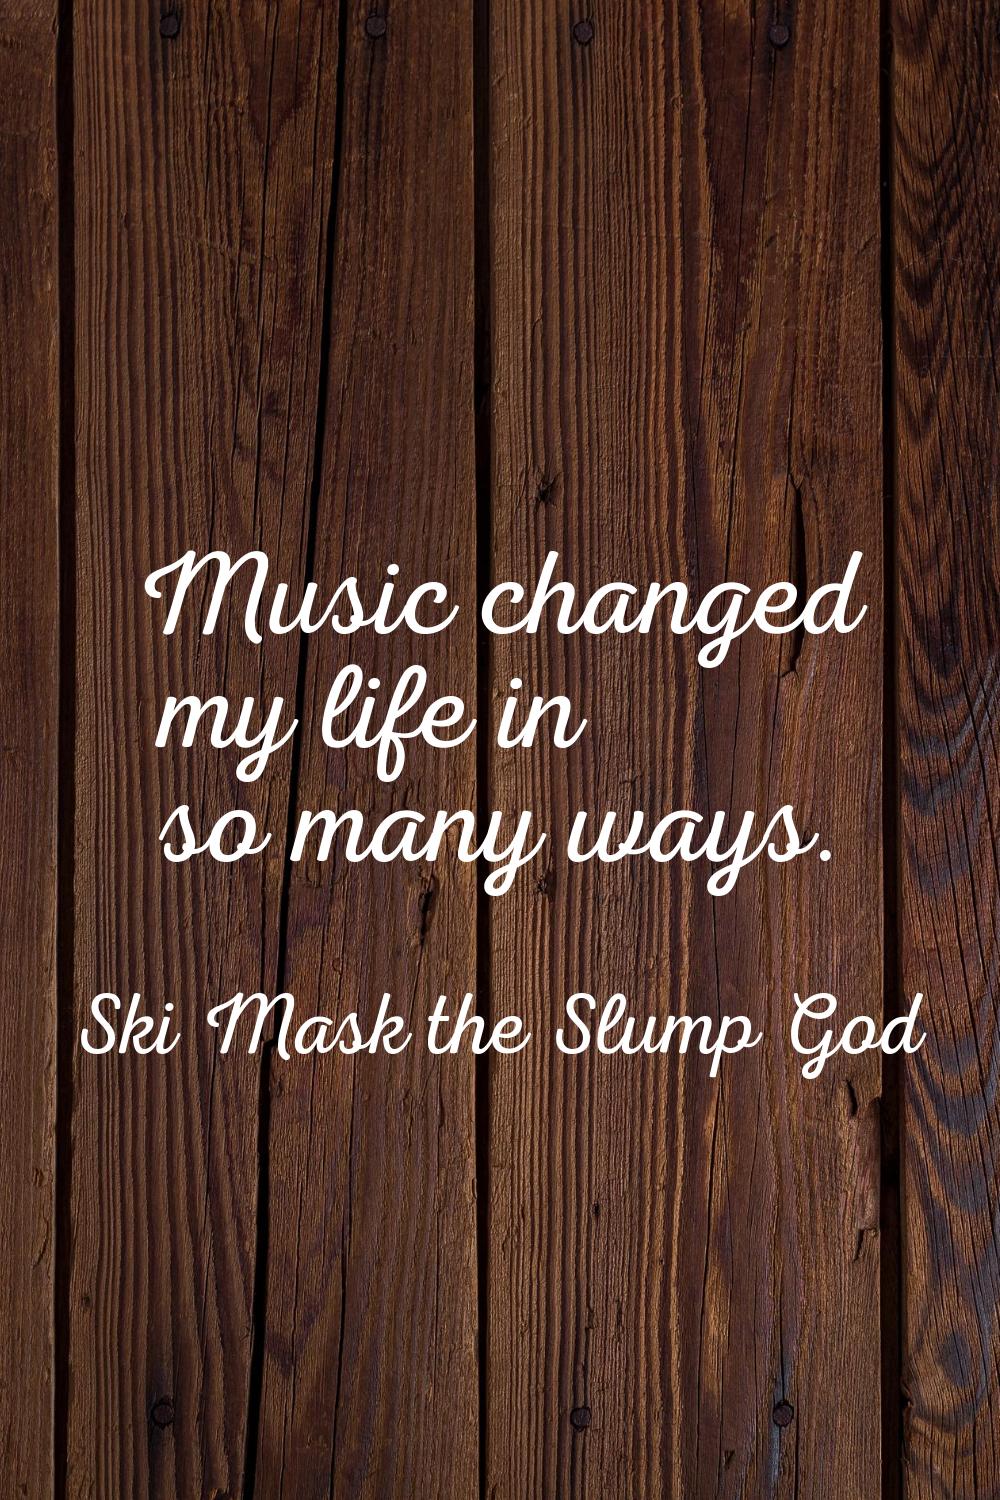 Music changed my life in so many ways.